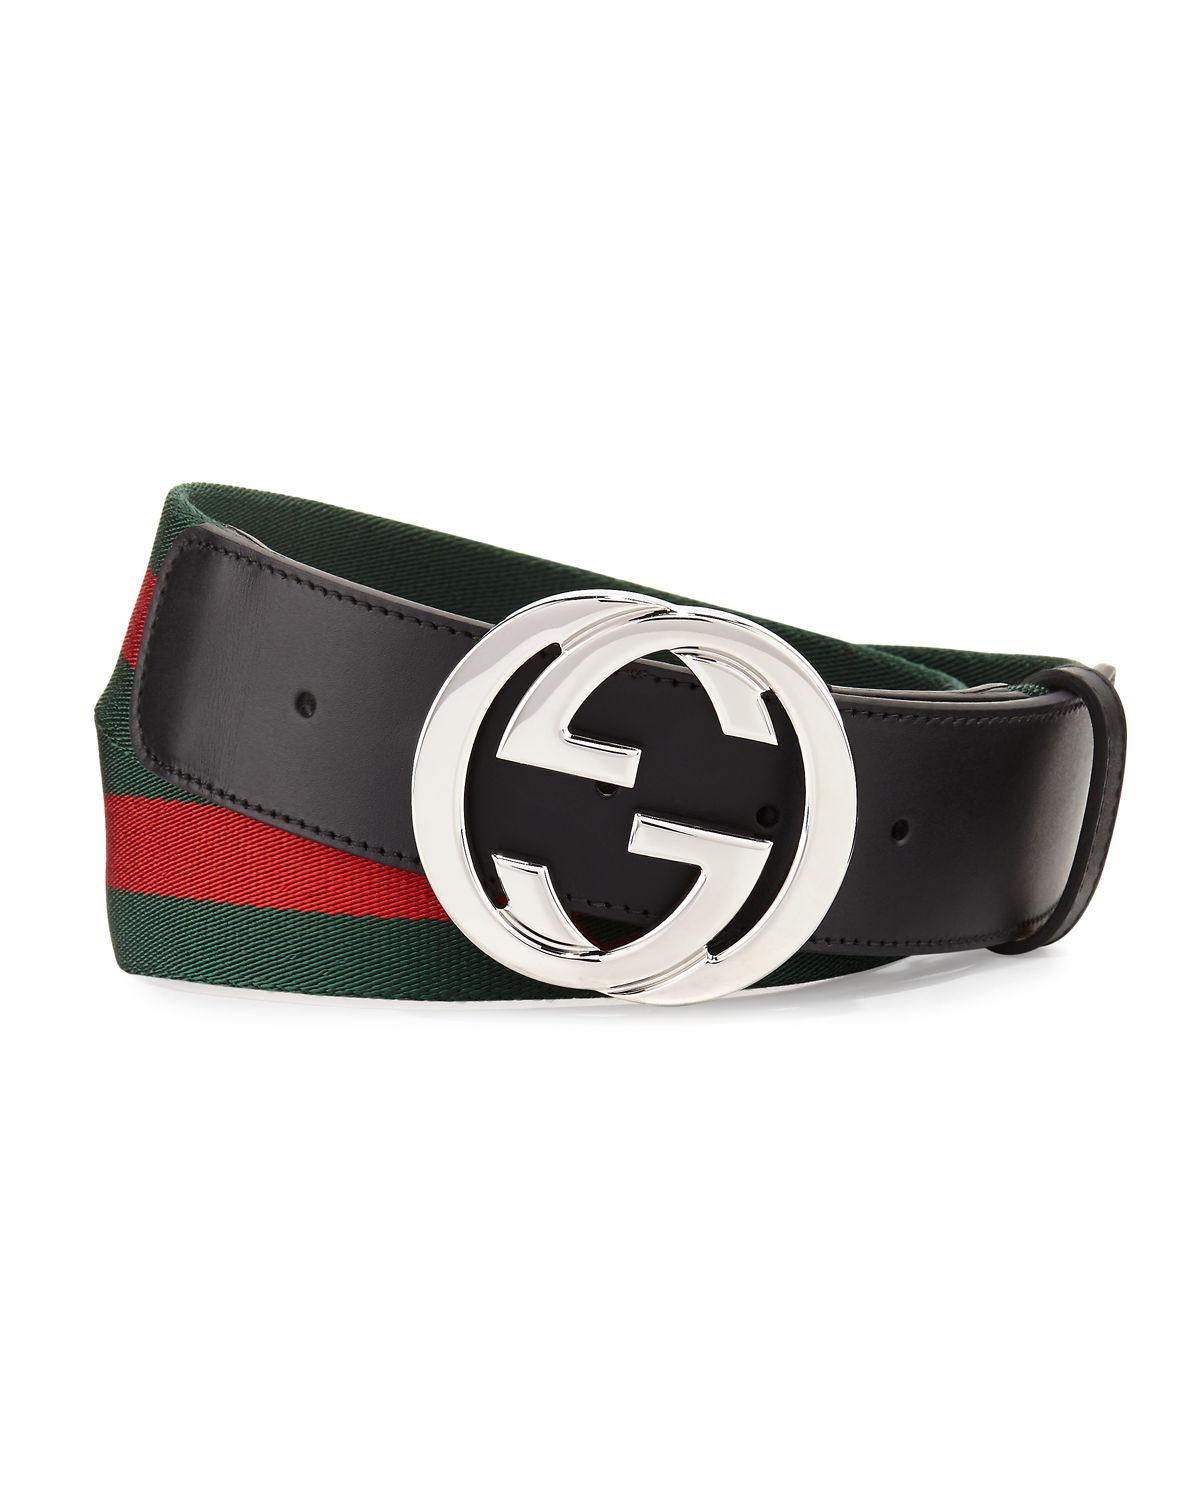 Gucci Interlocking G Pure Web Belt Green/Red/Black in Fabric/Leather with  Silver-tone - US